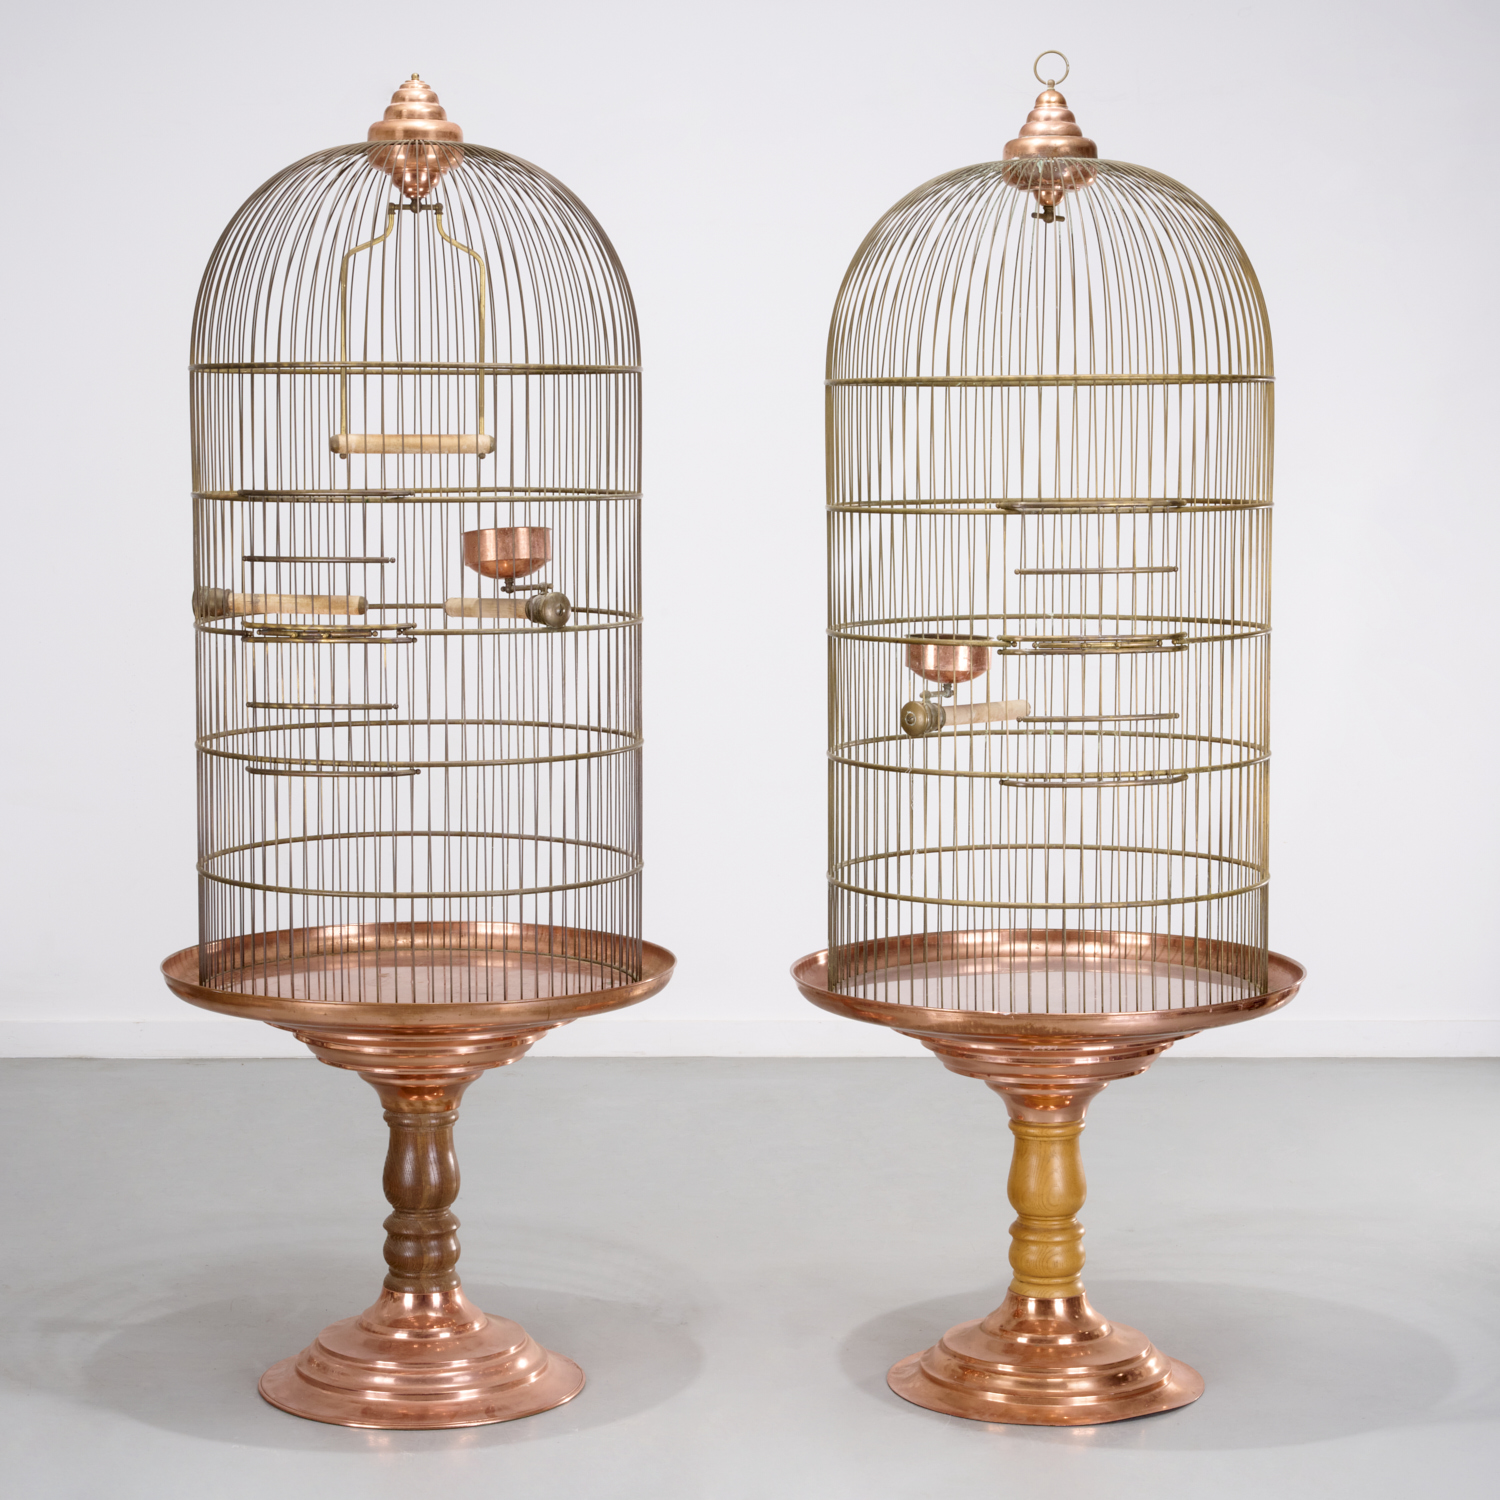 Pair oversized copper bird cages on stands